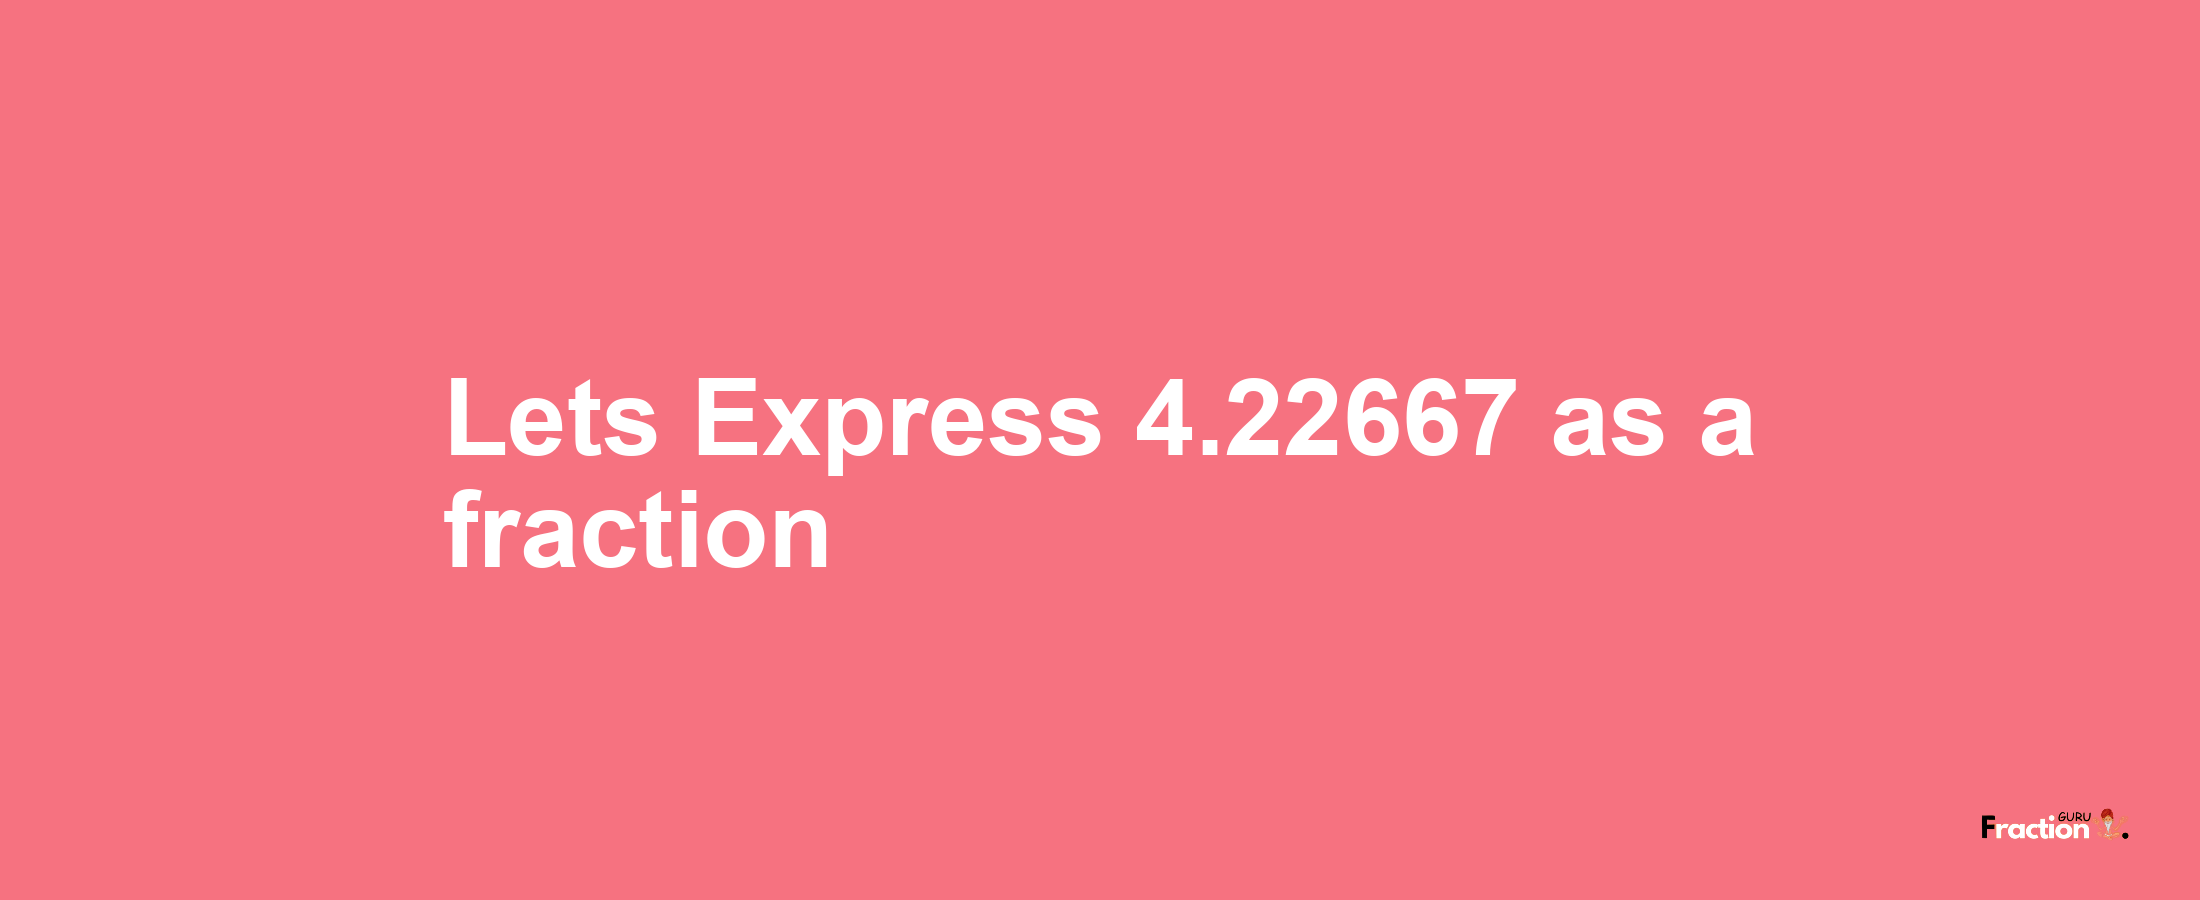 Lets Express 4.22667 as afraction